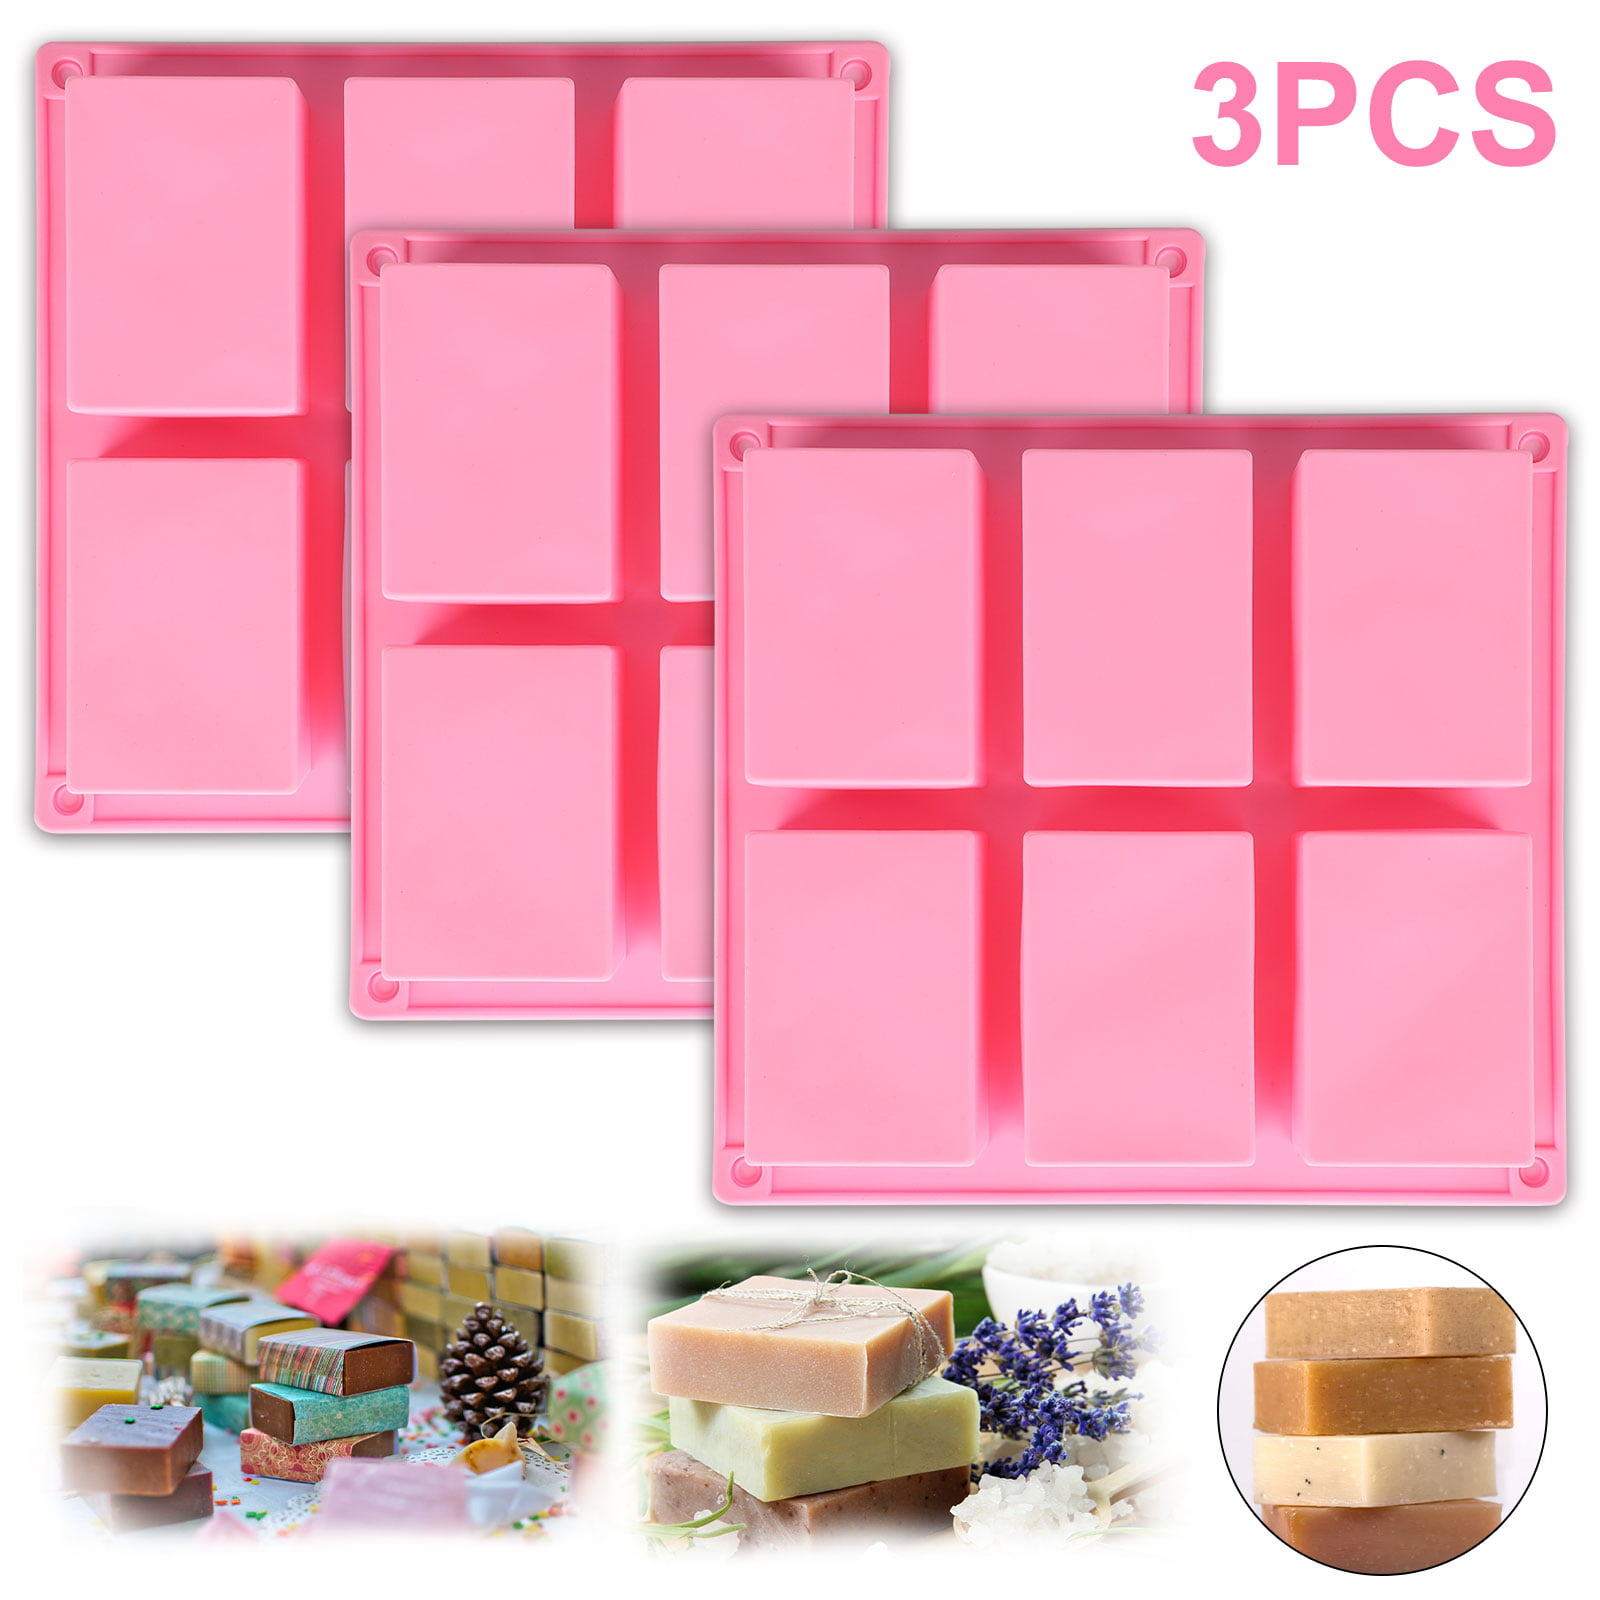 2 Pack Silicone Soap Molds 6 Cavities Soap Baking Cake Mold for DIY Soap Gift US